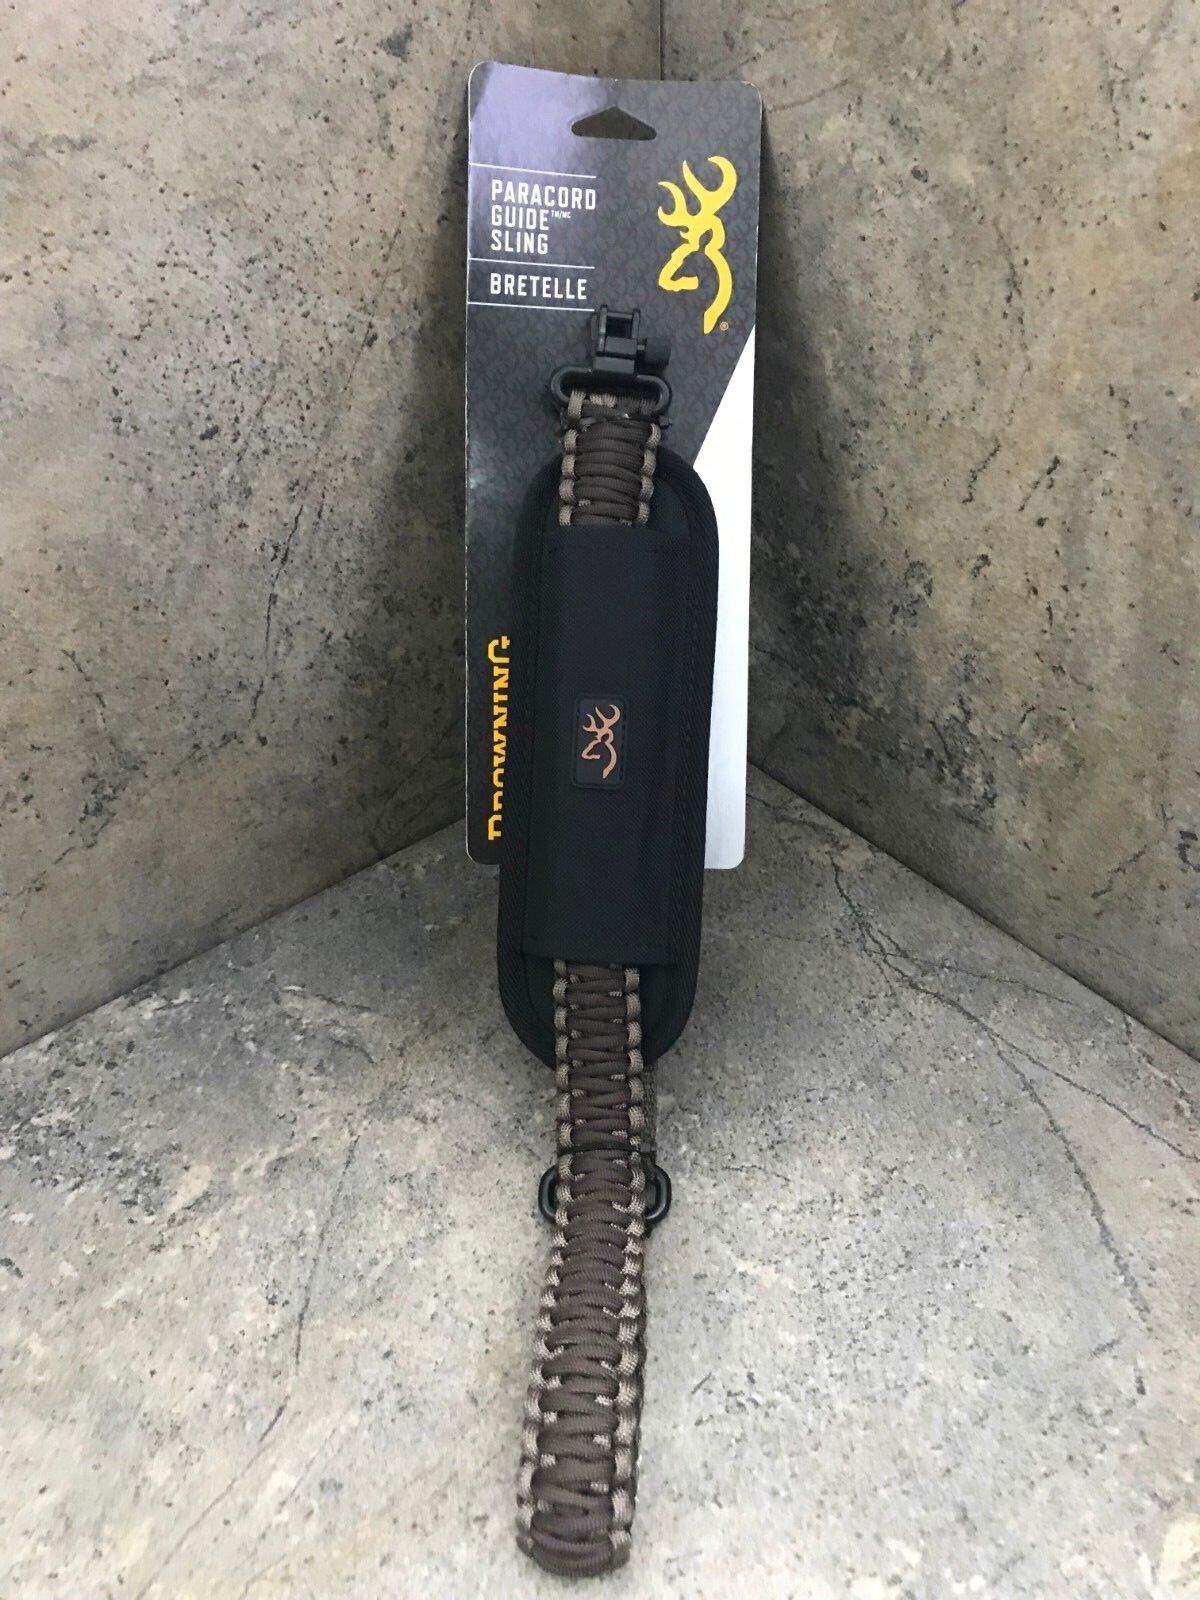 Browning Paracord Brown/Tan Sling 122968825 Swivels Included